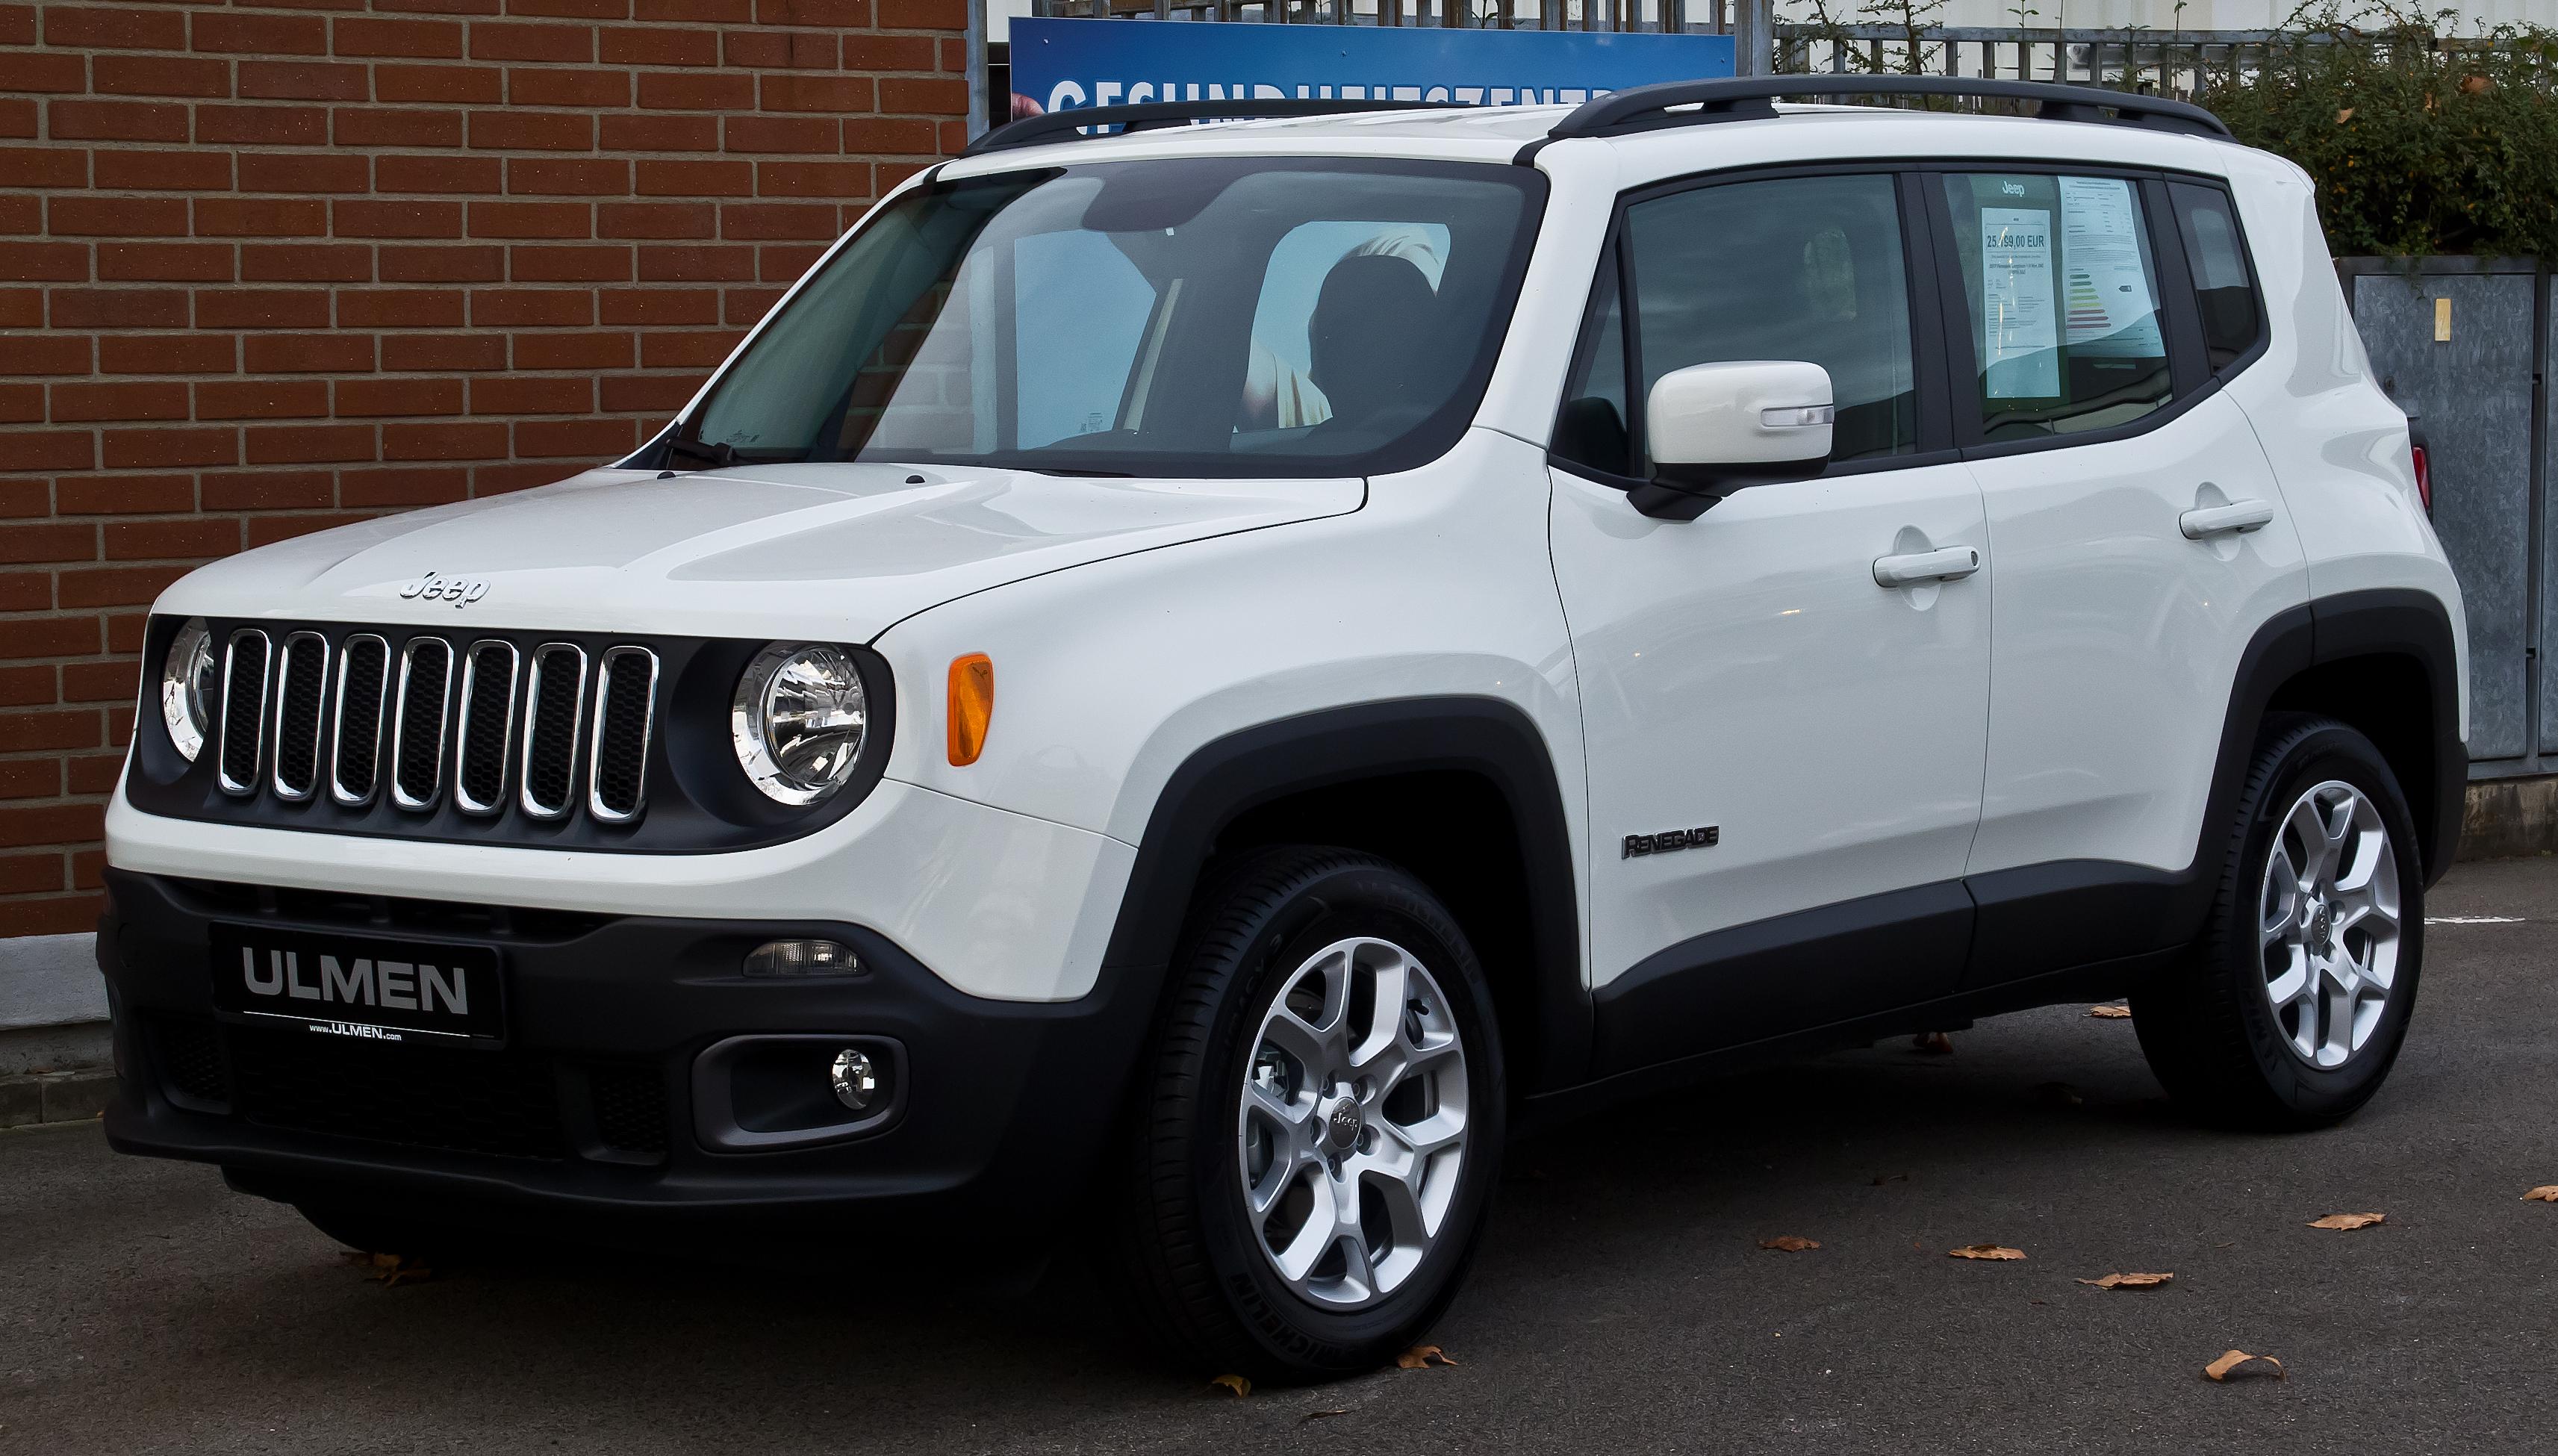 - Additional costs to consider when wrapping a Jeep Renegade